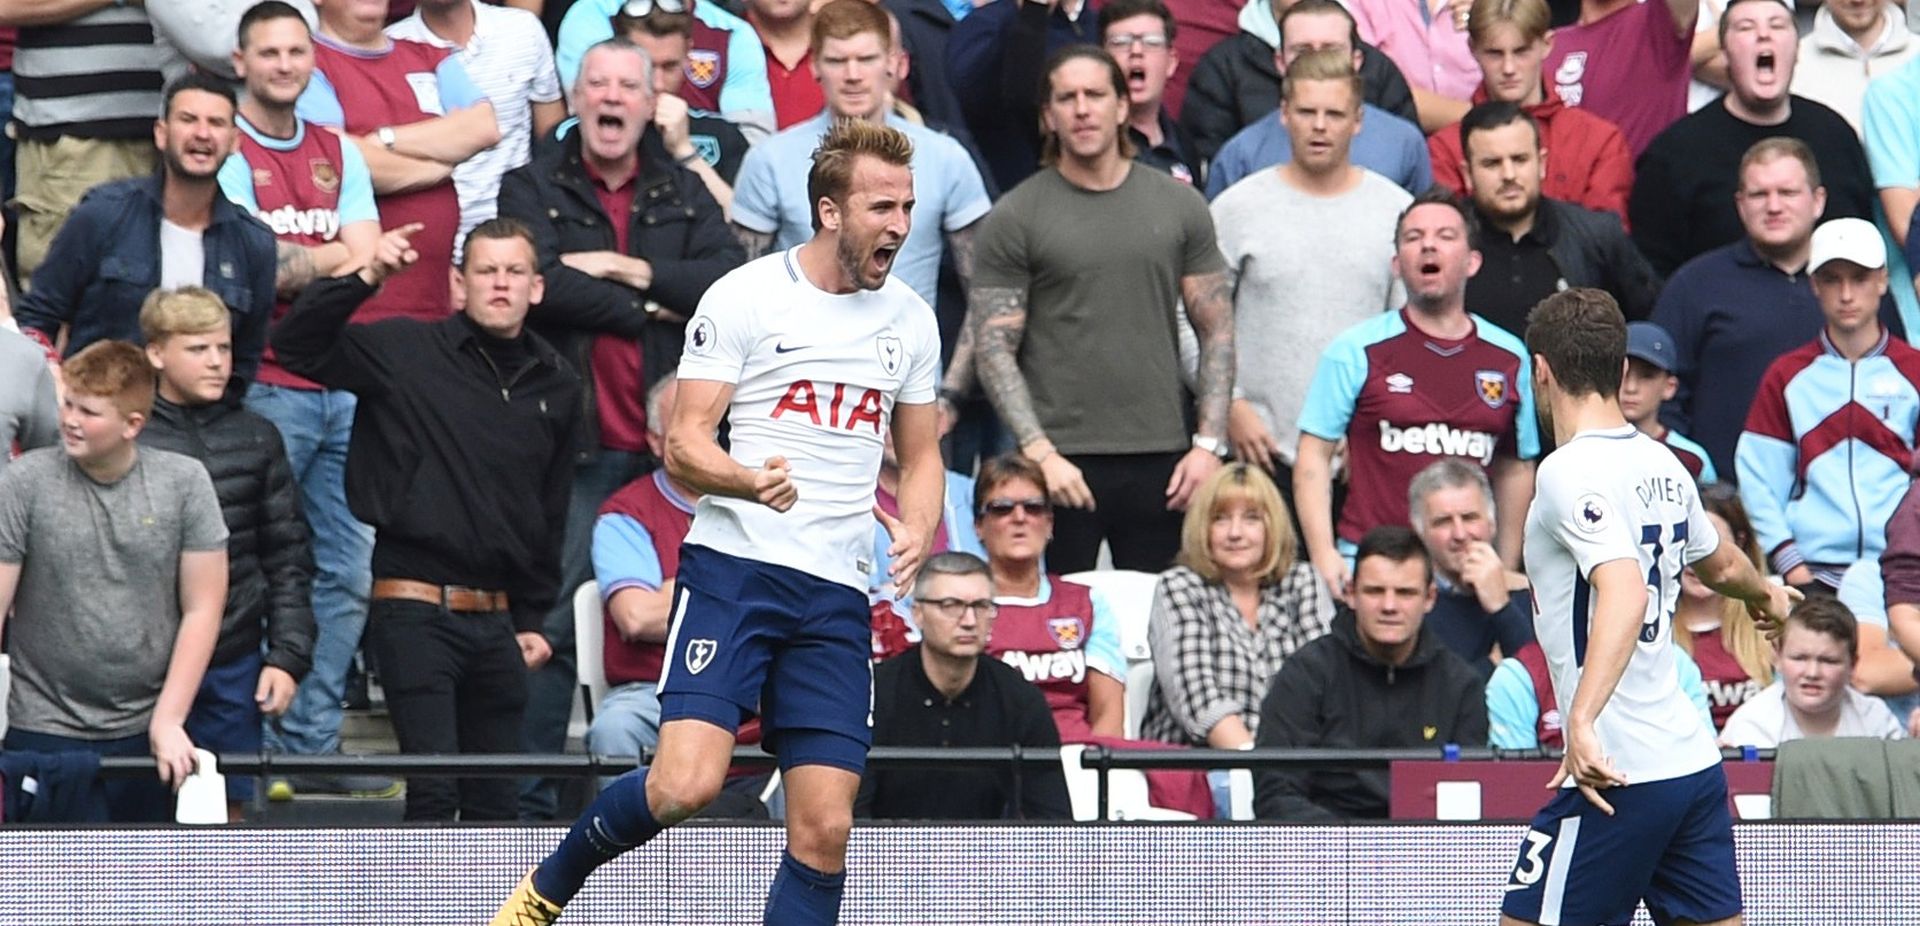 epa06221437 Tottenham Hotspurs' Harry Kane (L) celebrates scoring a goal during the English Premier League match between West Ham and Tottenham Hotspurs at London stadium, in London, Britain, 23 September 2017.  EPA/FACUNDO ARRIZABALAGA EDITORIAL USE ONLY. No use with unauthorized audio, video, data, fixture lists, club/league logos or 'live' services. Online in-match use limited to 75 images, no video emulation. No use in betting, games or single club/league/player publications.